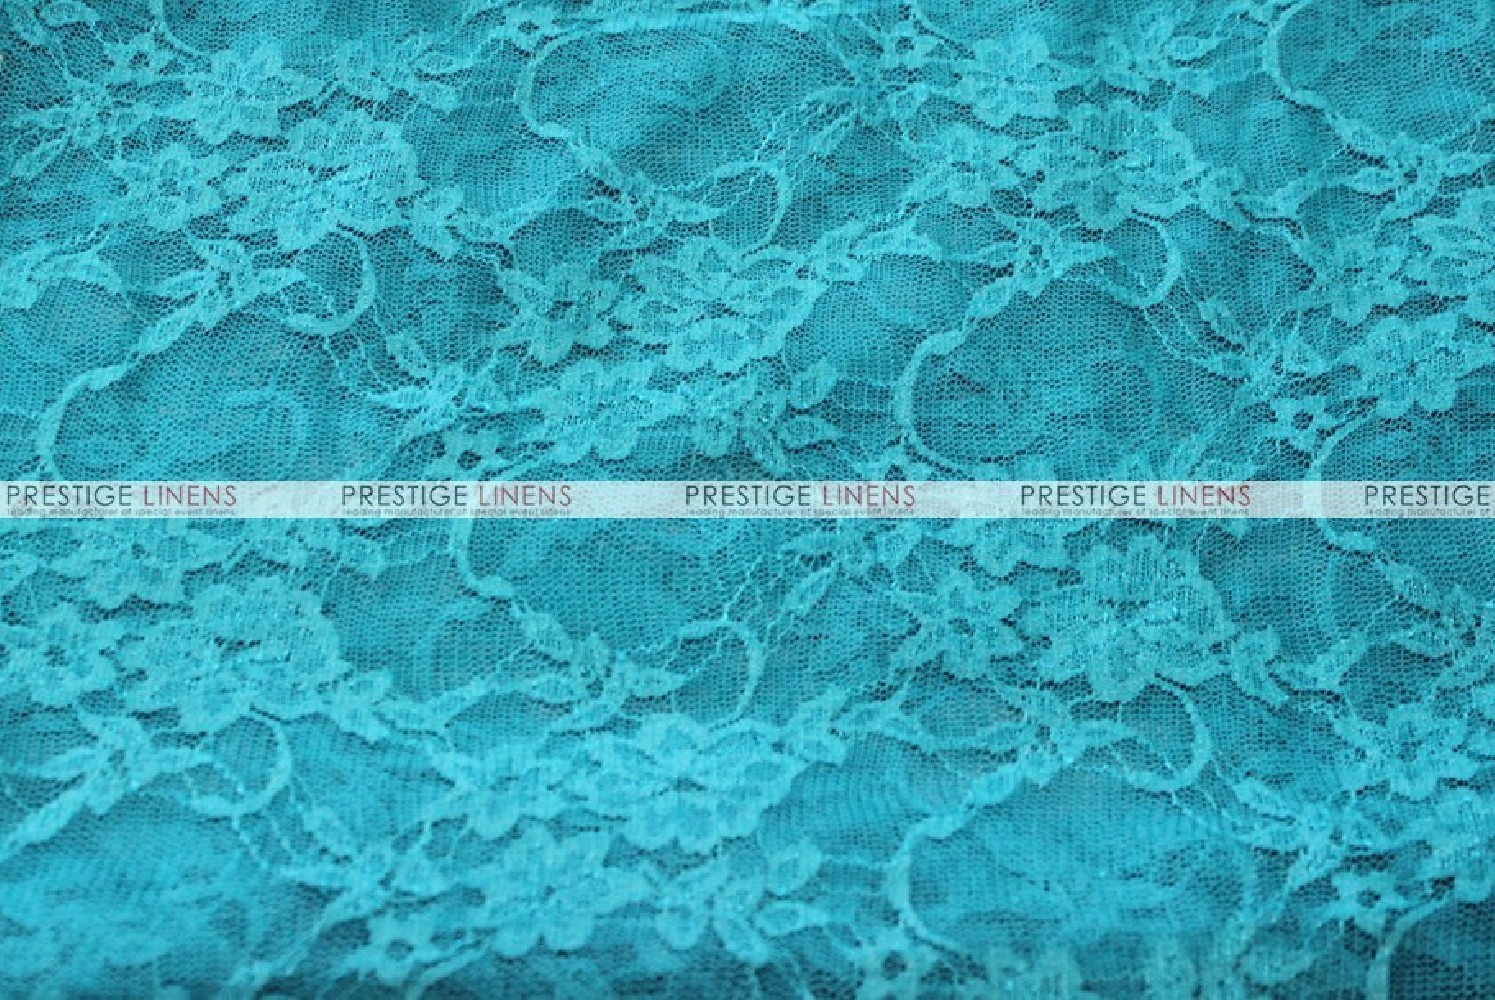 Women's Lace Teal Green Bra Size Medium Stretch Texture Fabric Vintage